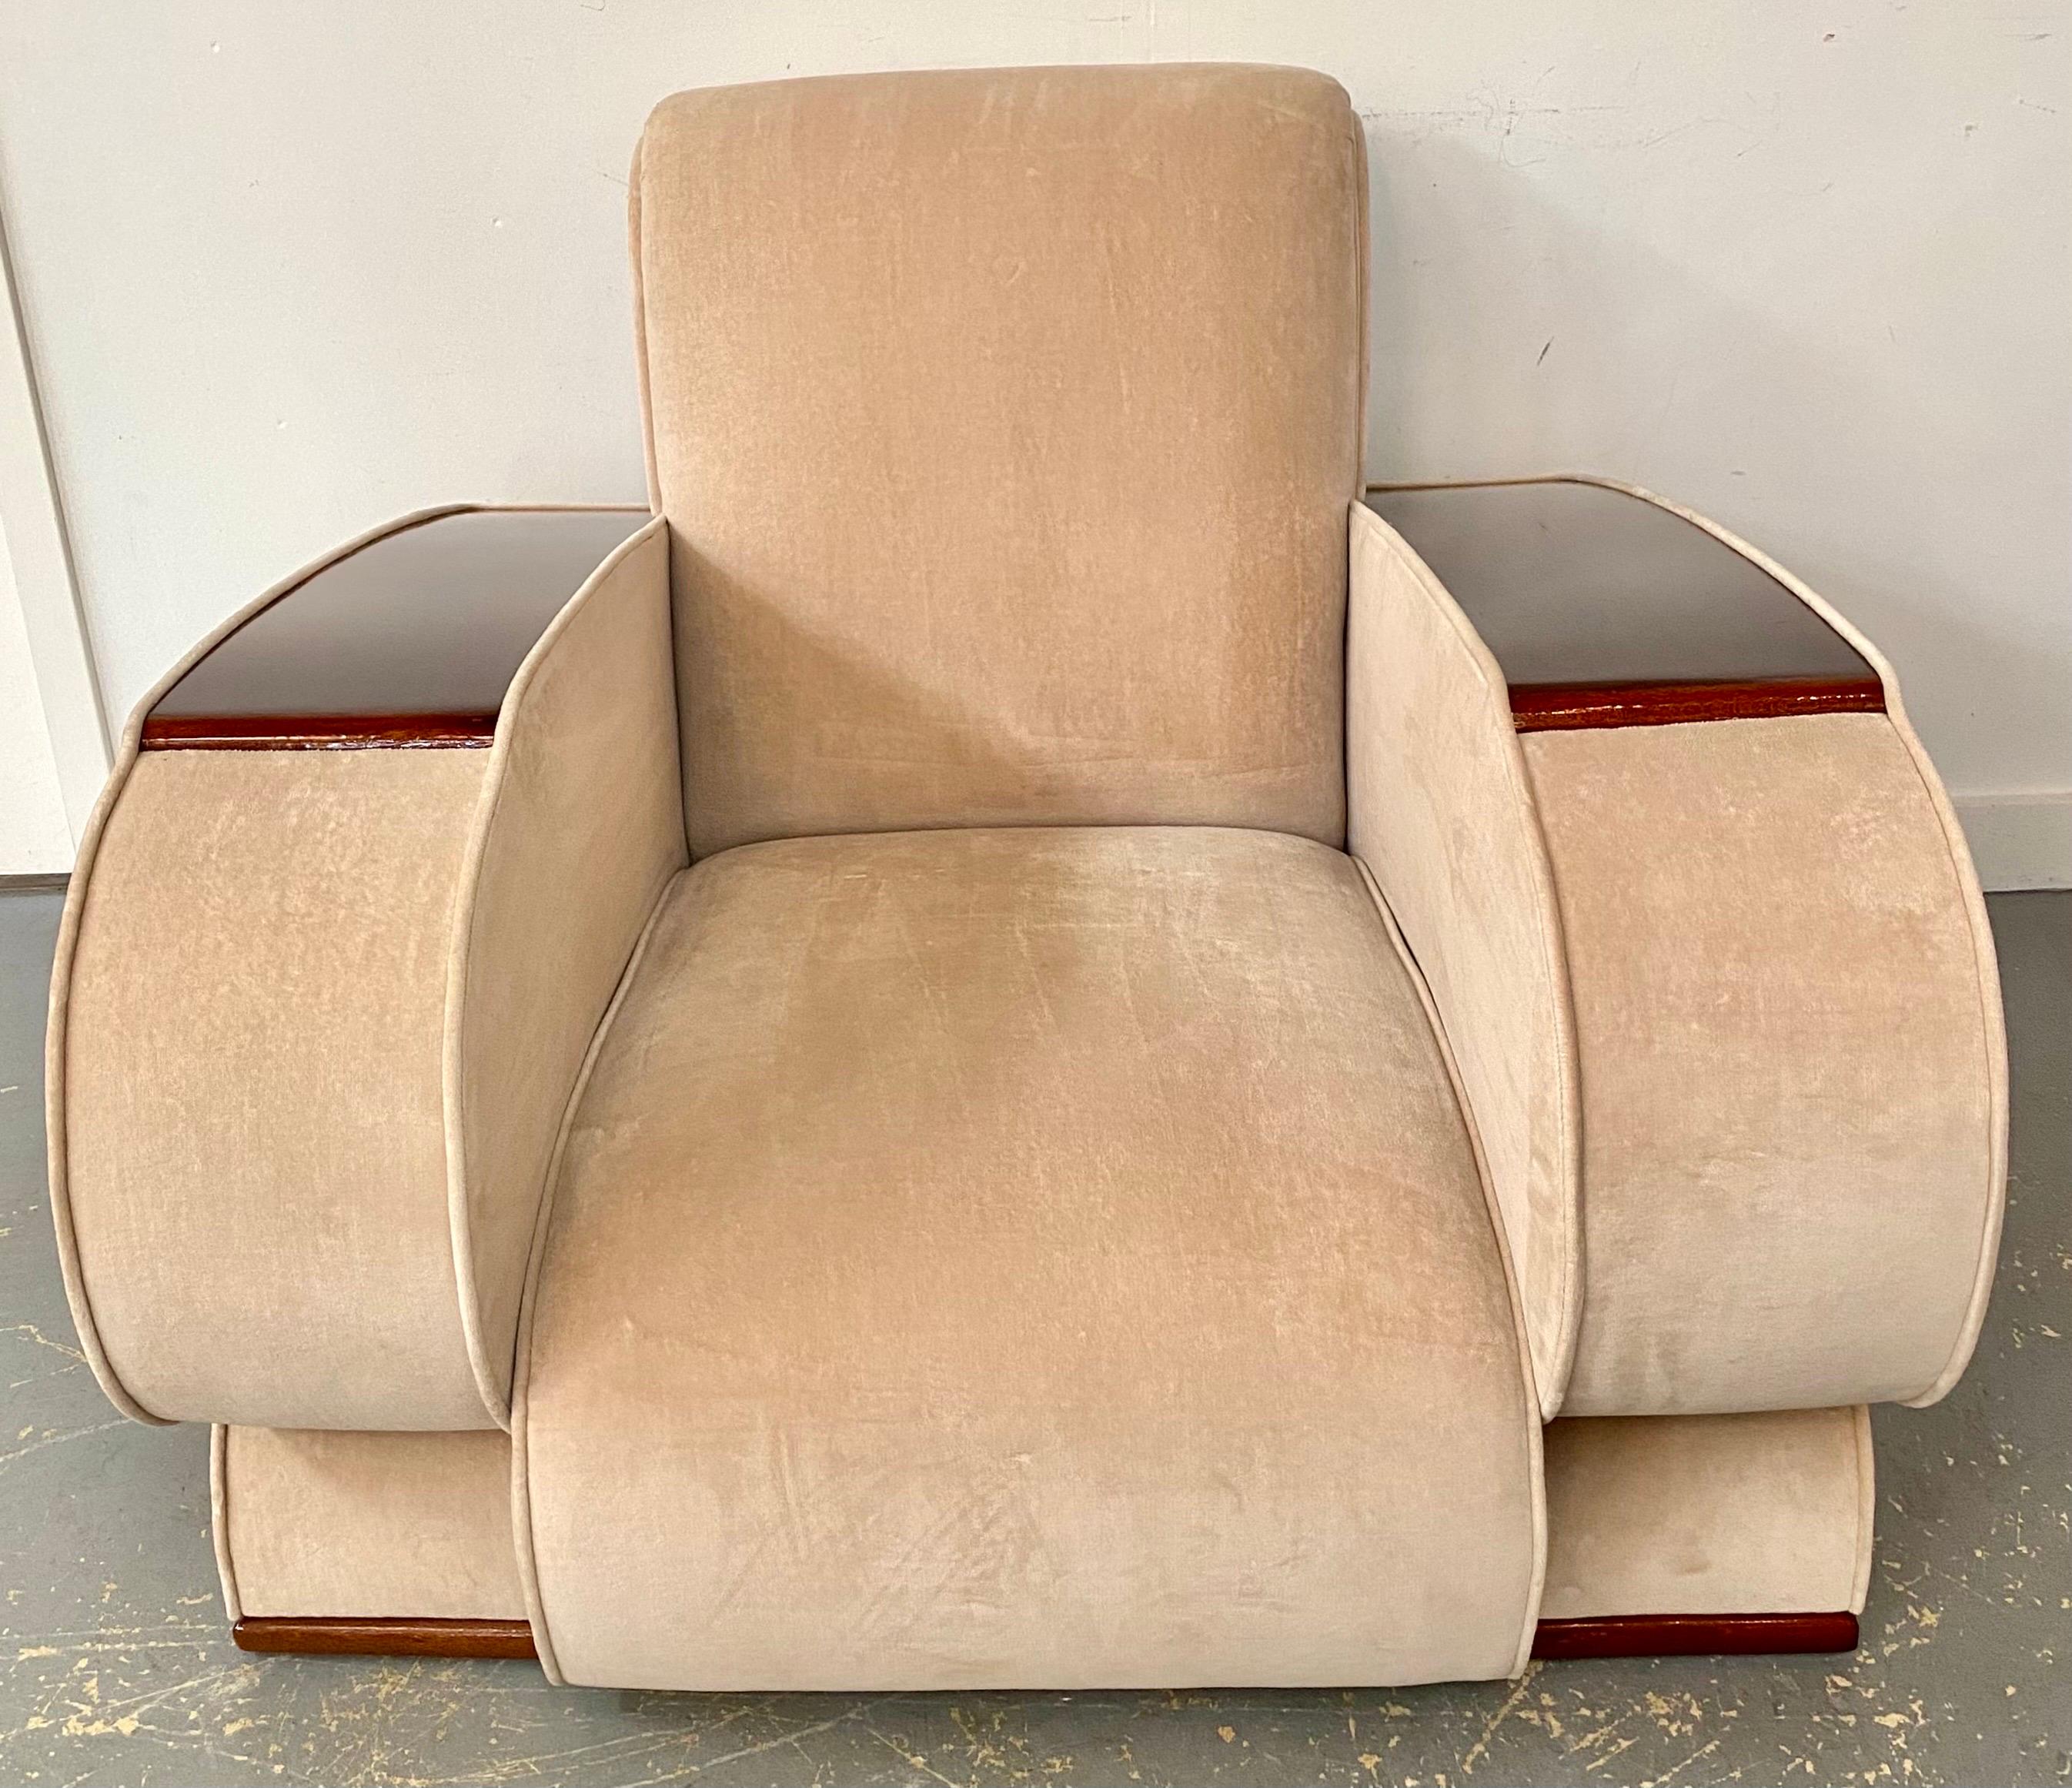 French Art Deco Club or Lounge Chair in Beige Suede Upholstery, a Pair  For Sale 6